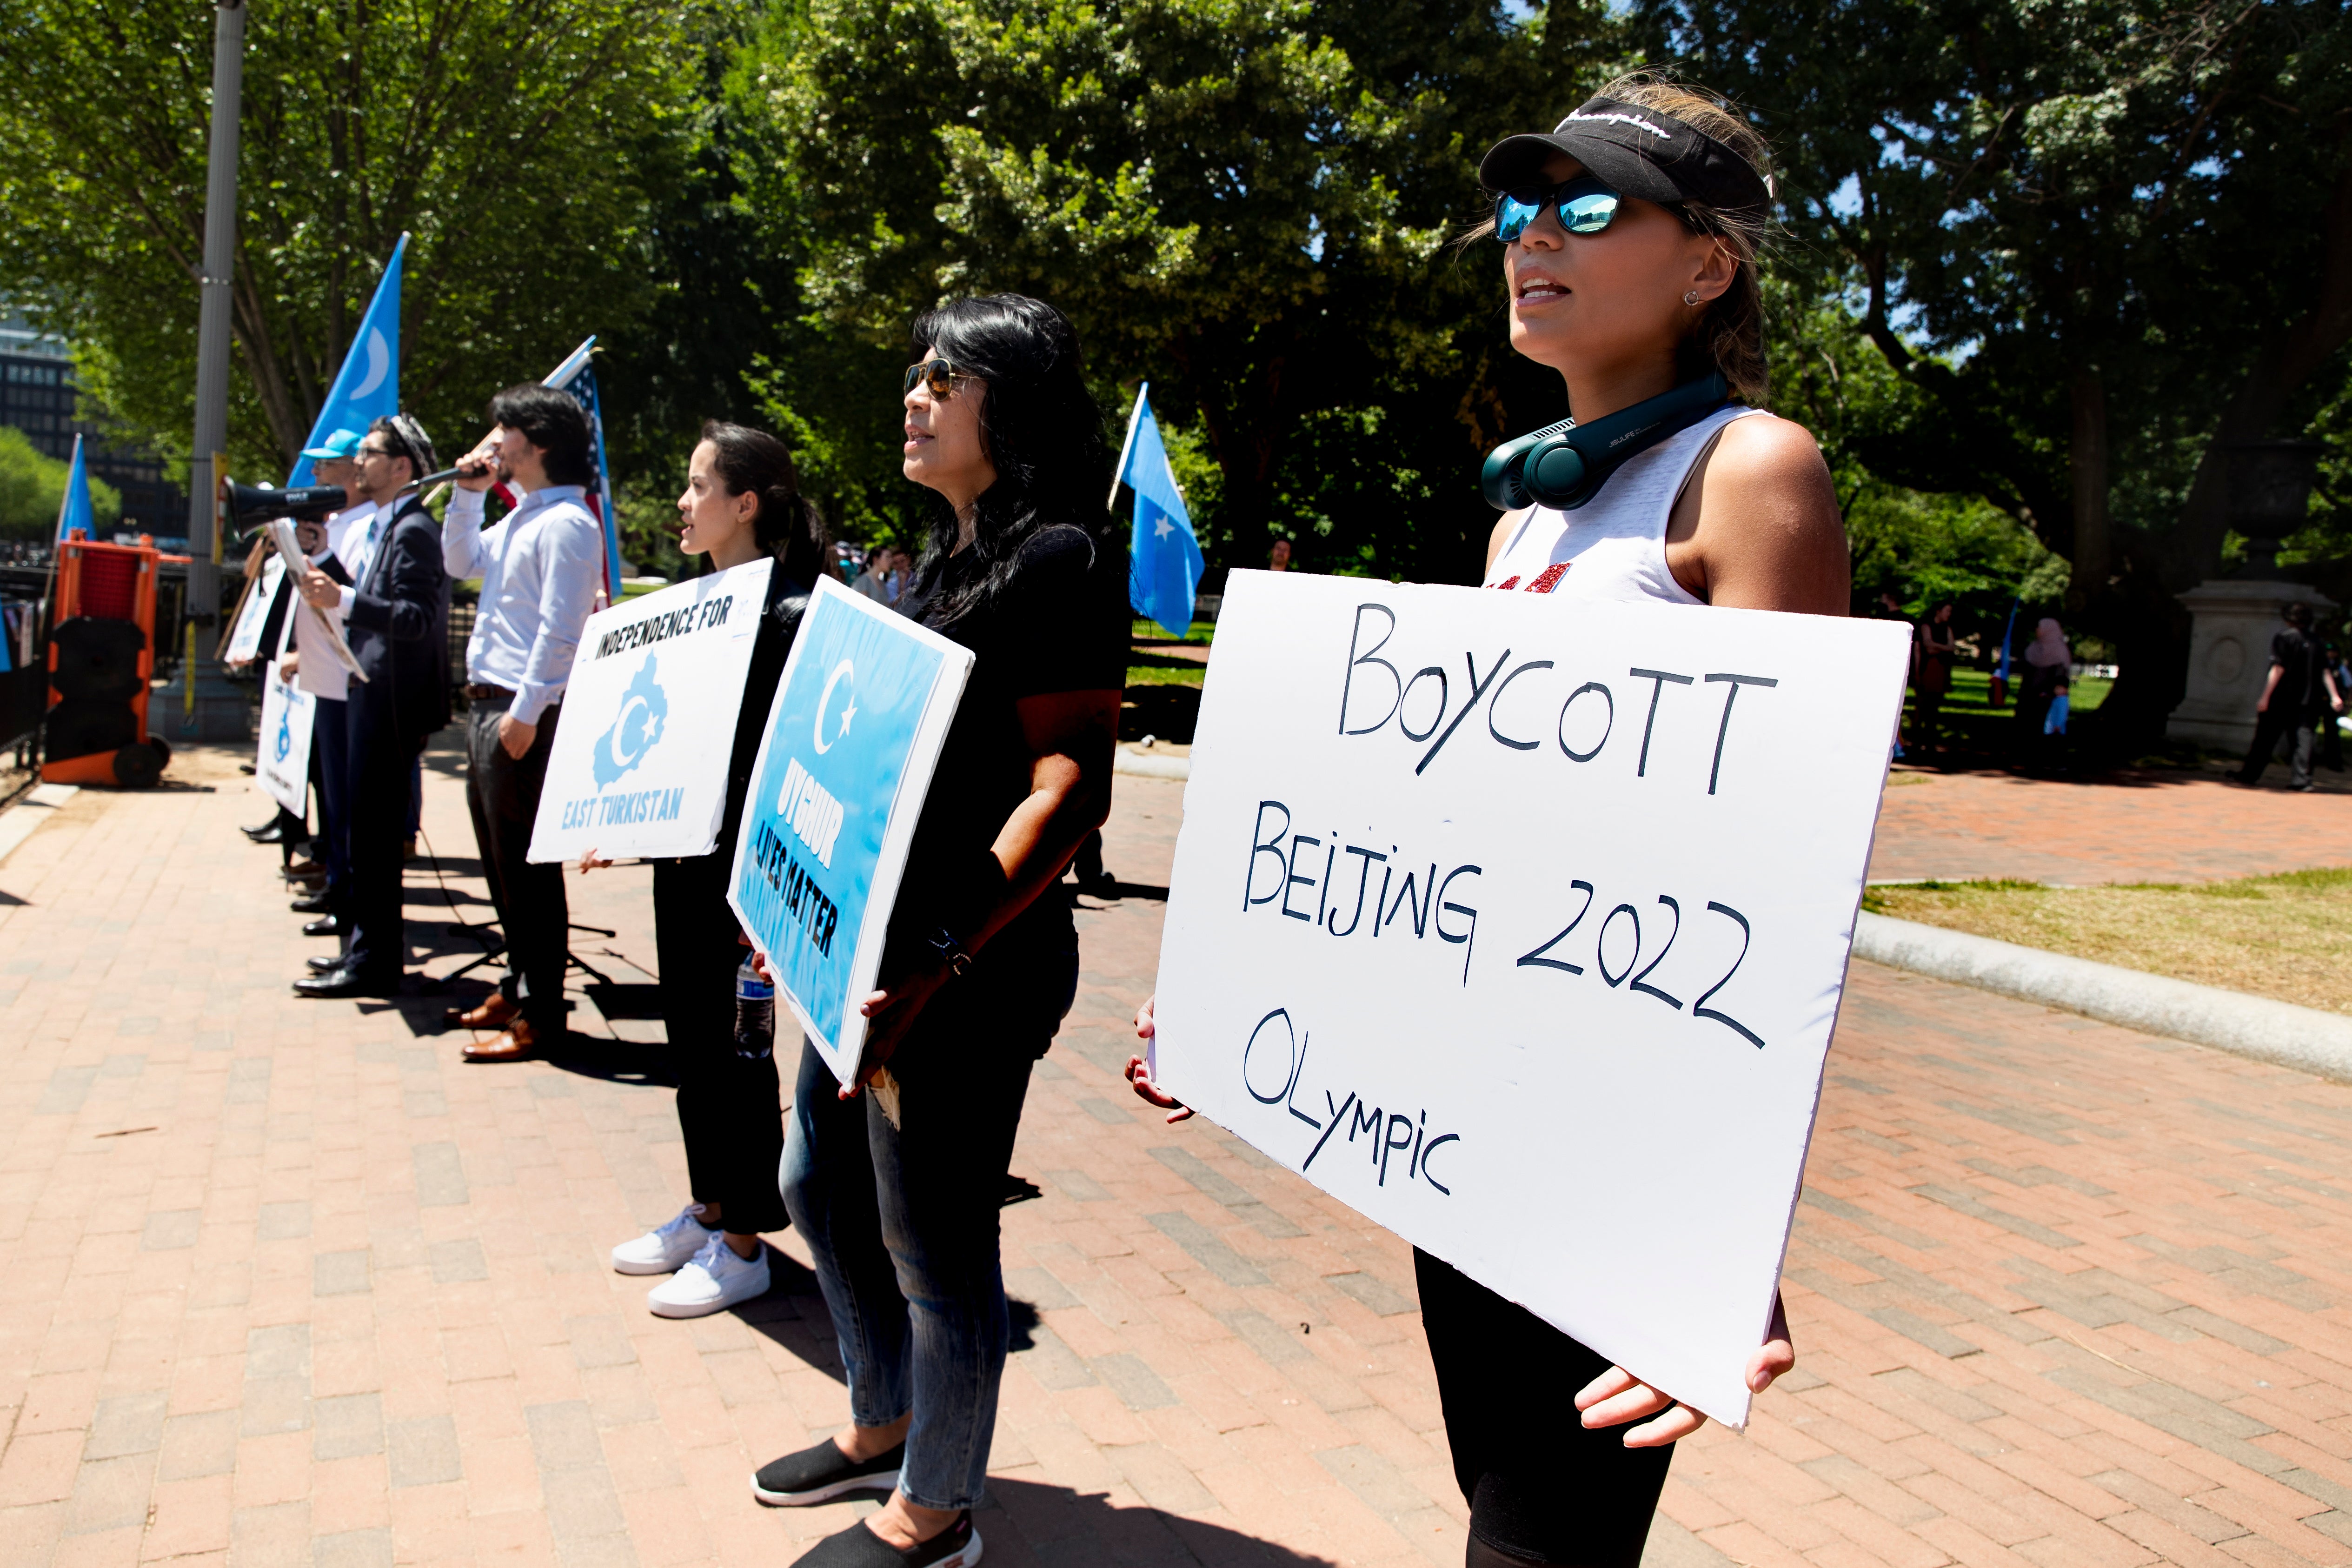 File image: Activists who support independence from China for the Xinjiang Uighur Autonomous Region, which they refer to as 'East Turkestan', gather in Lafayette Square across the street from the White House on 4 June 2021